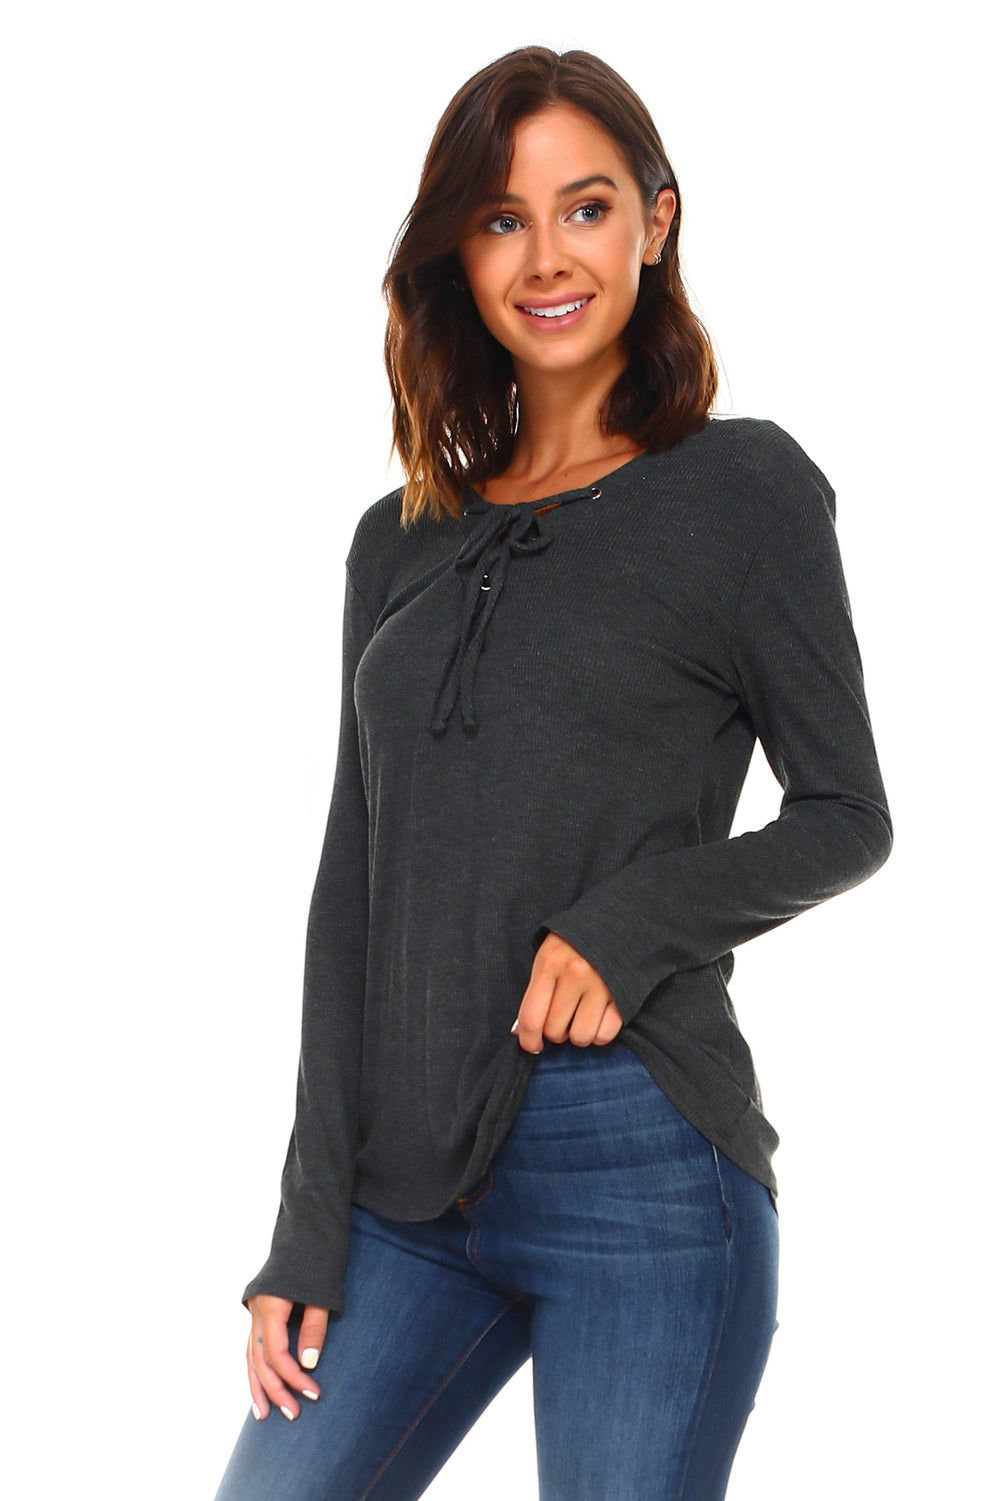 Women's Lace Up Long Sleeve Top - Brand My Case